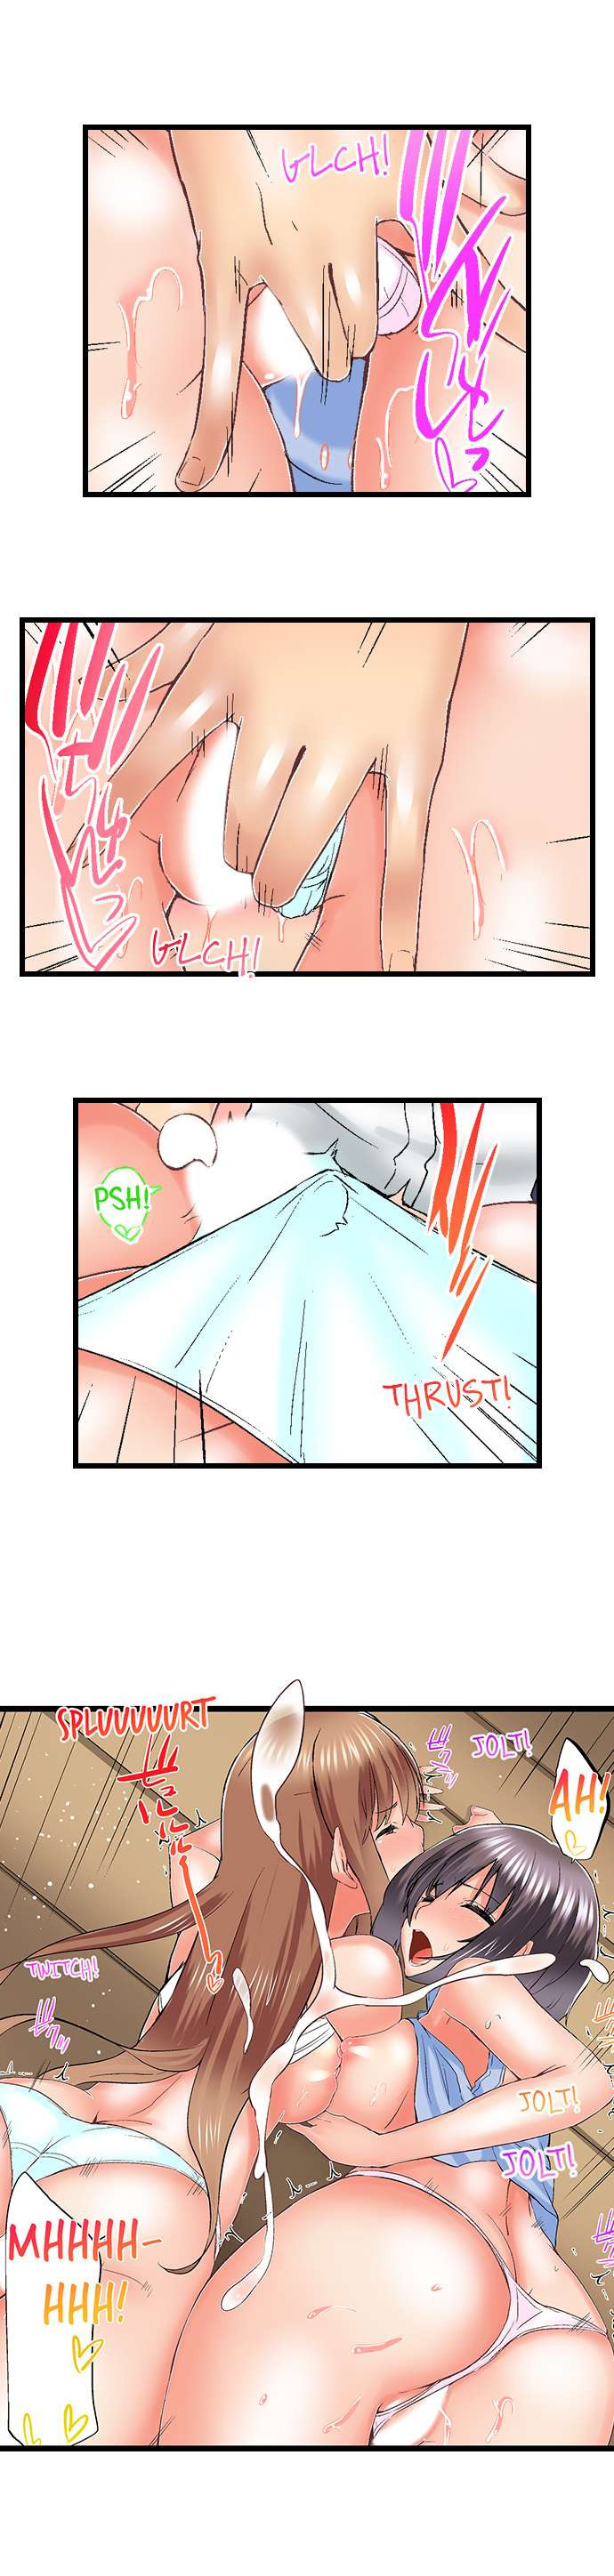 My Brother’s Slipped Inside Me in The Bathtub - Chapter 72 Page 8